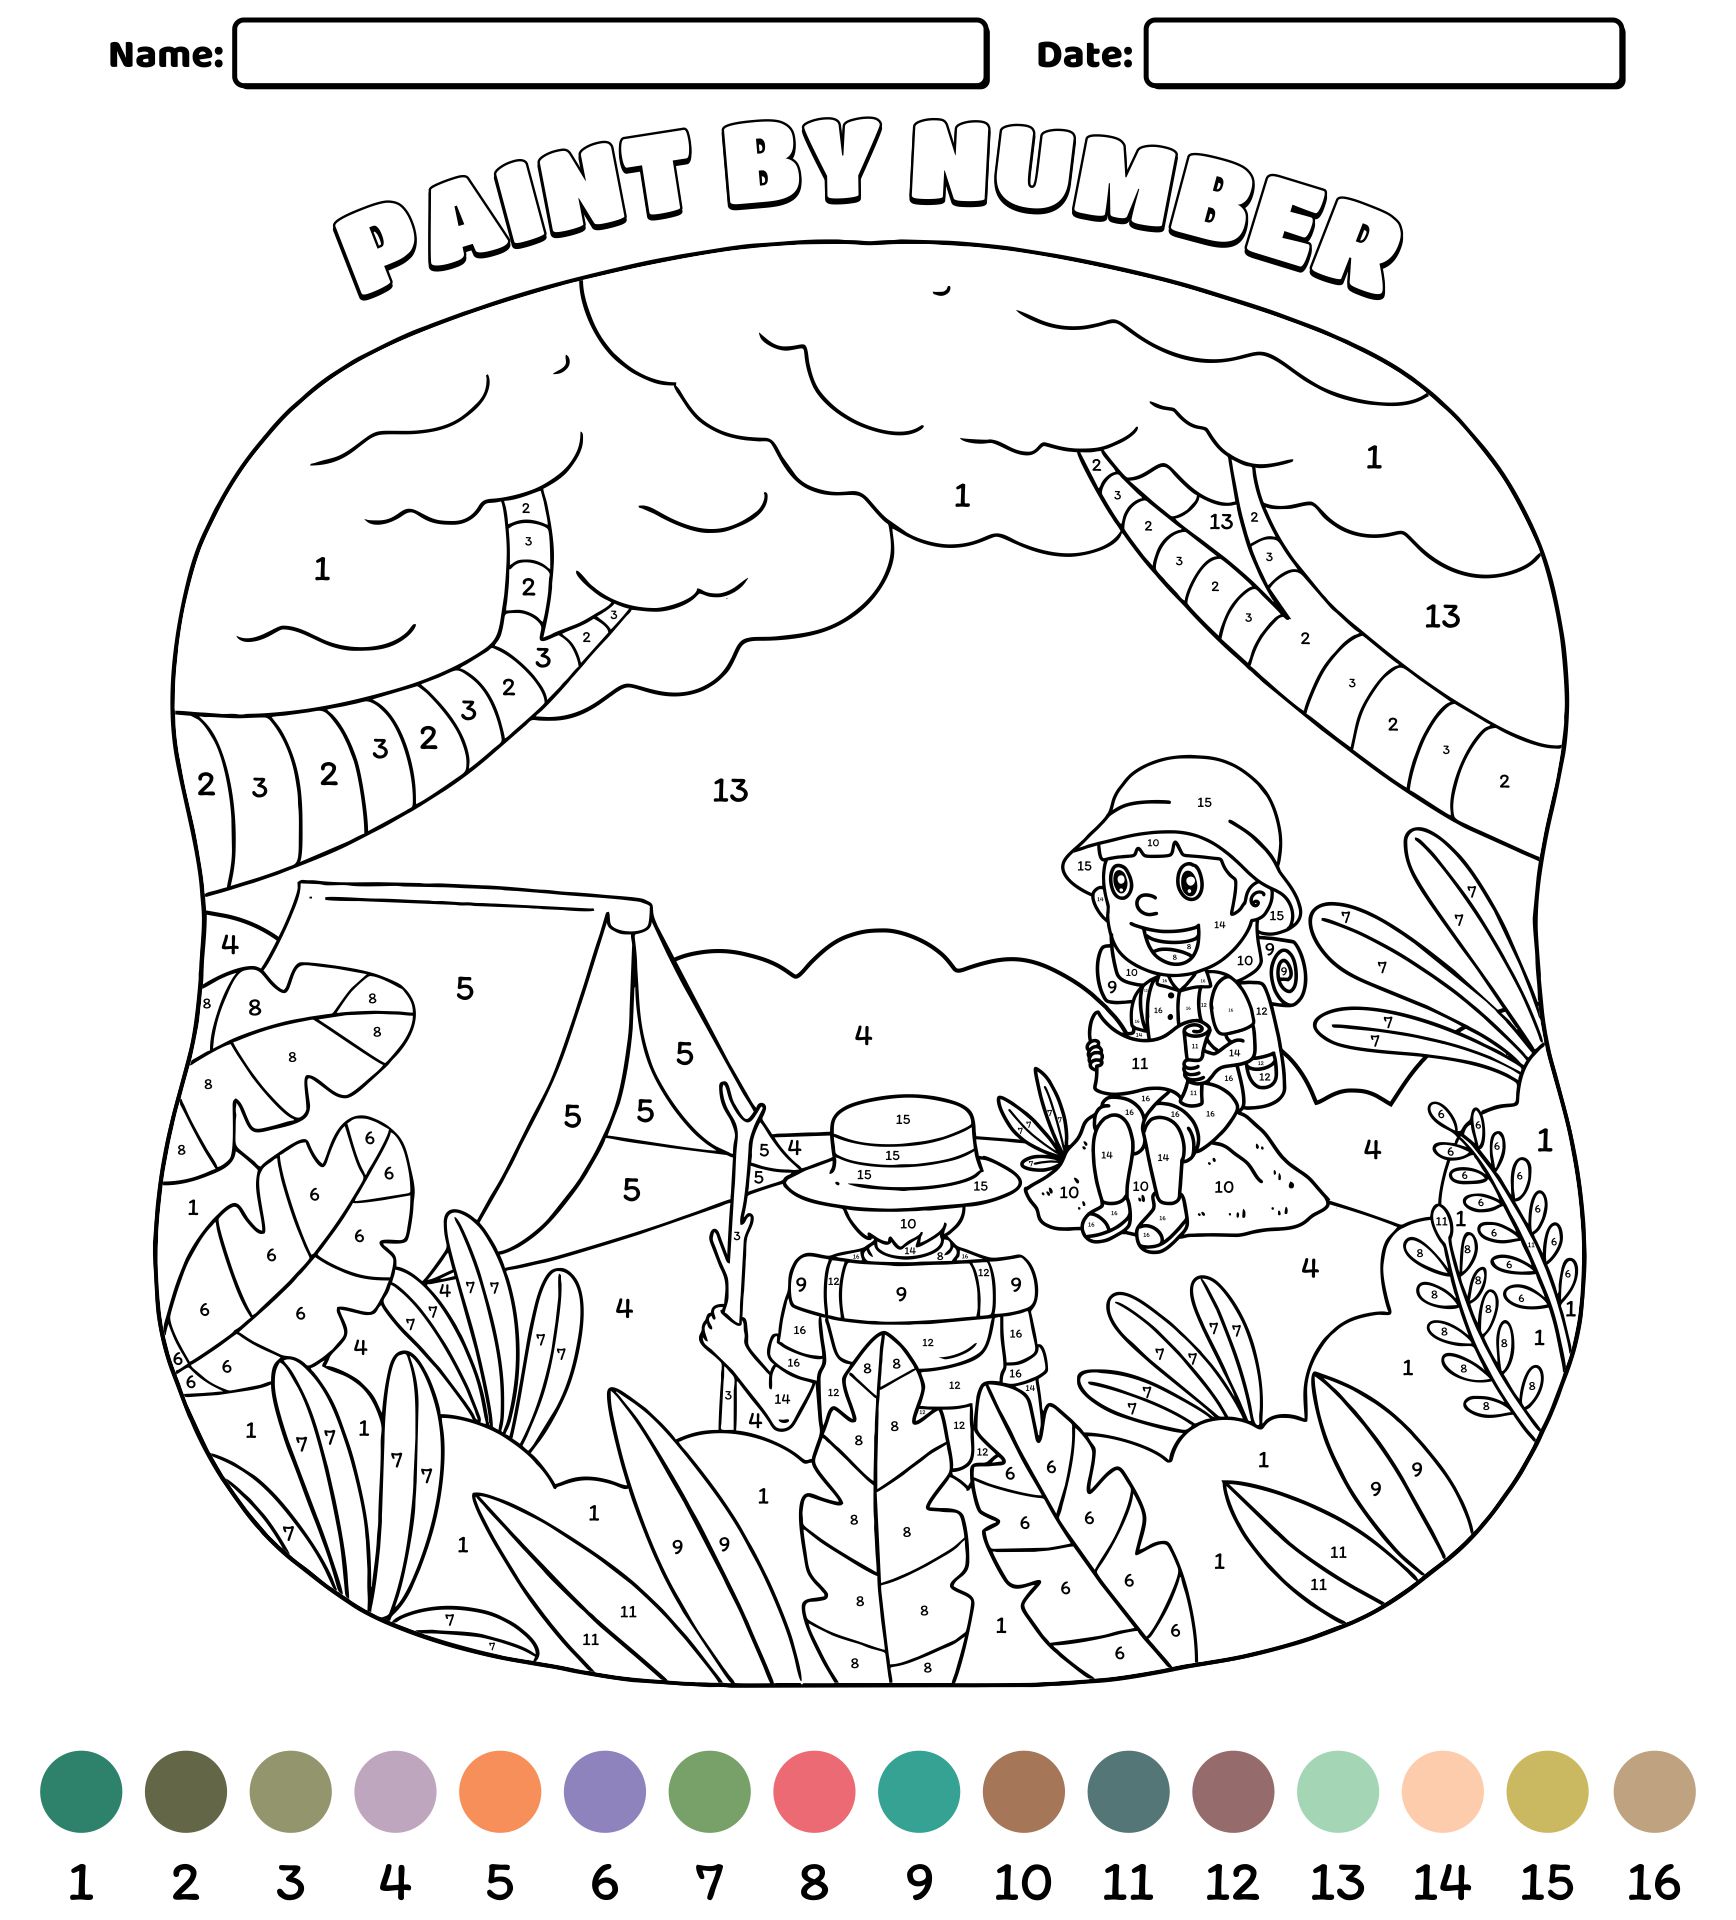 Printable Paint by Number